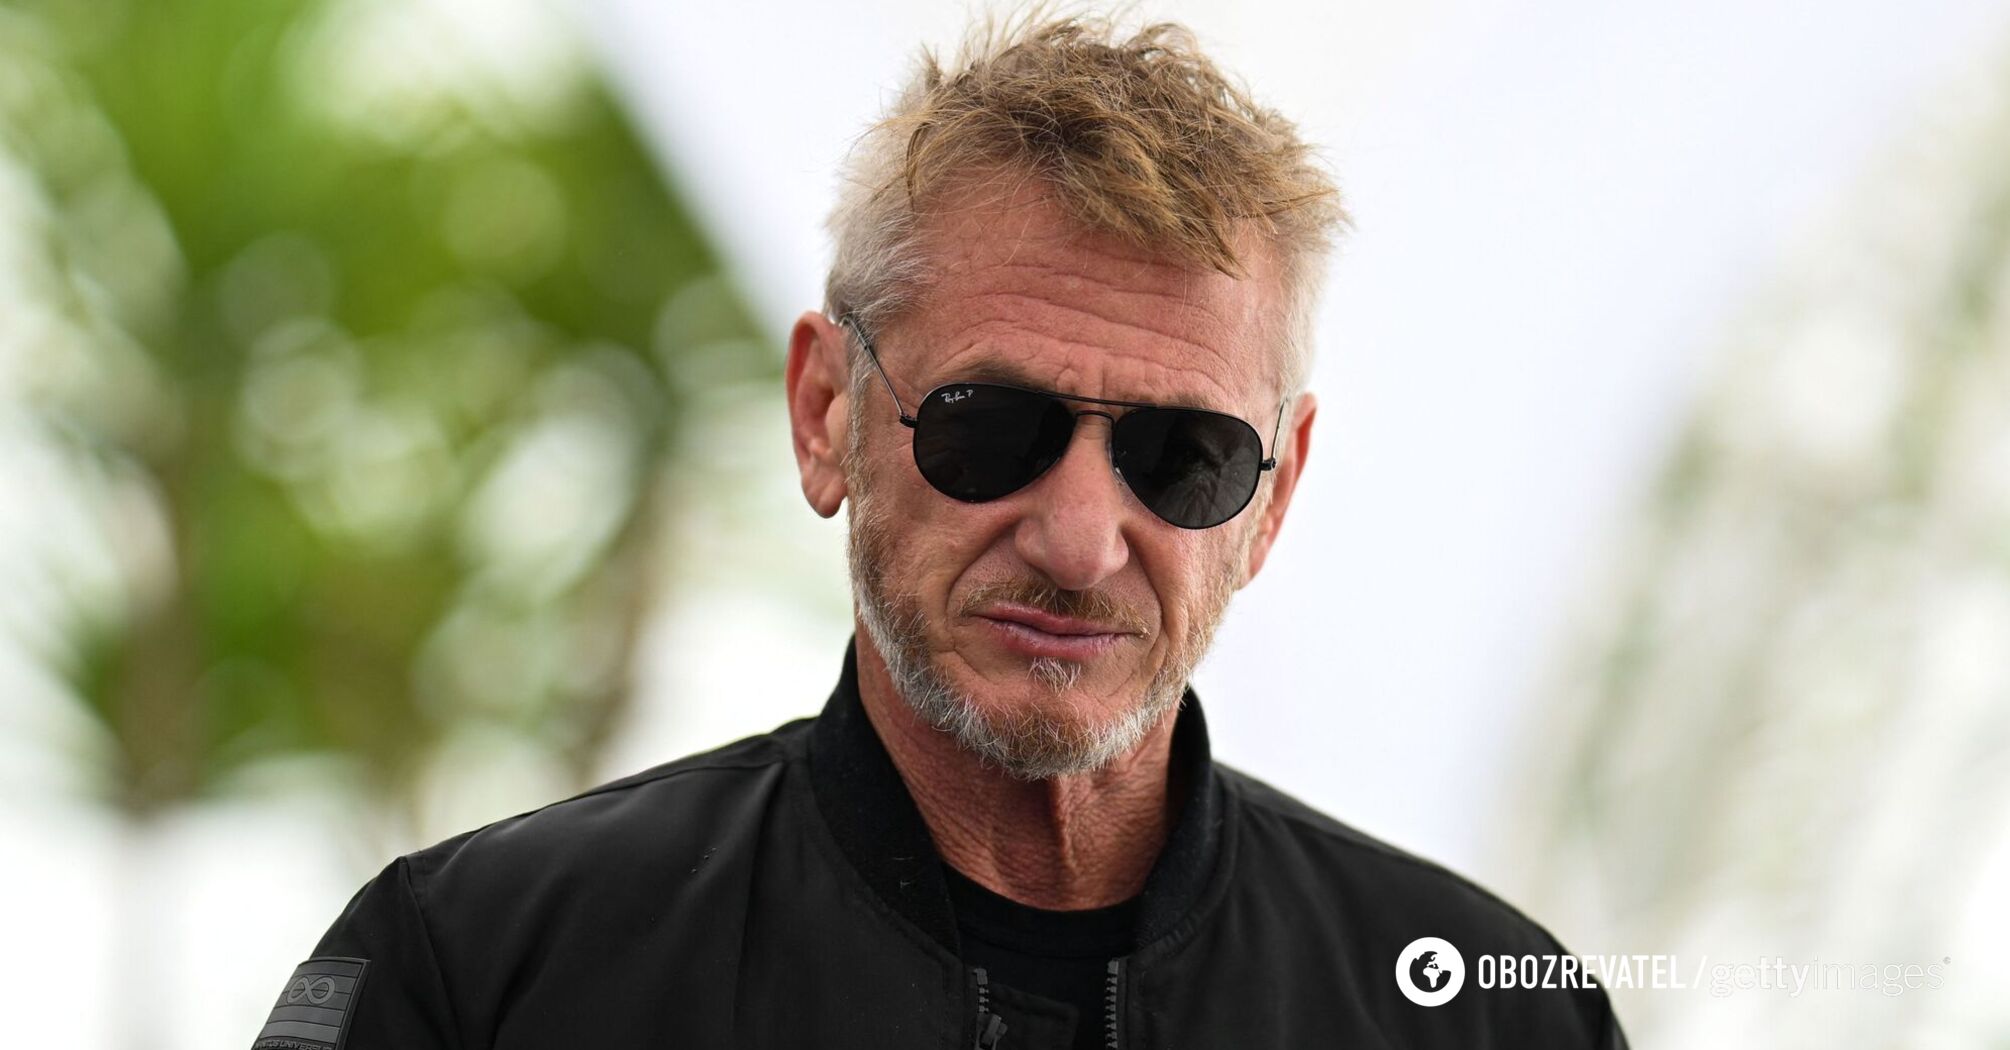 Sean Penn after breaking up with Ukrainian woman explains why he no longer wants a relationship